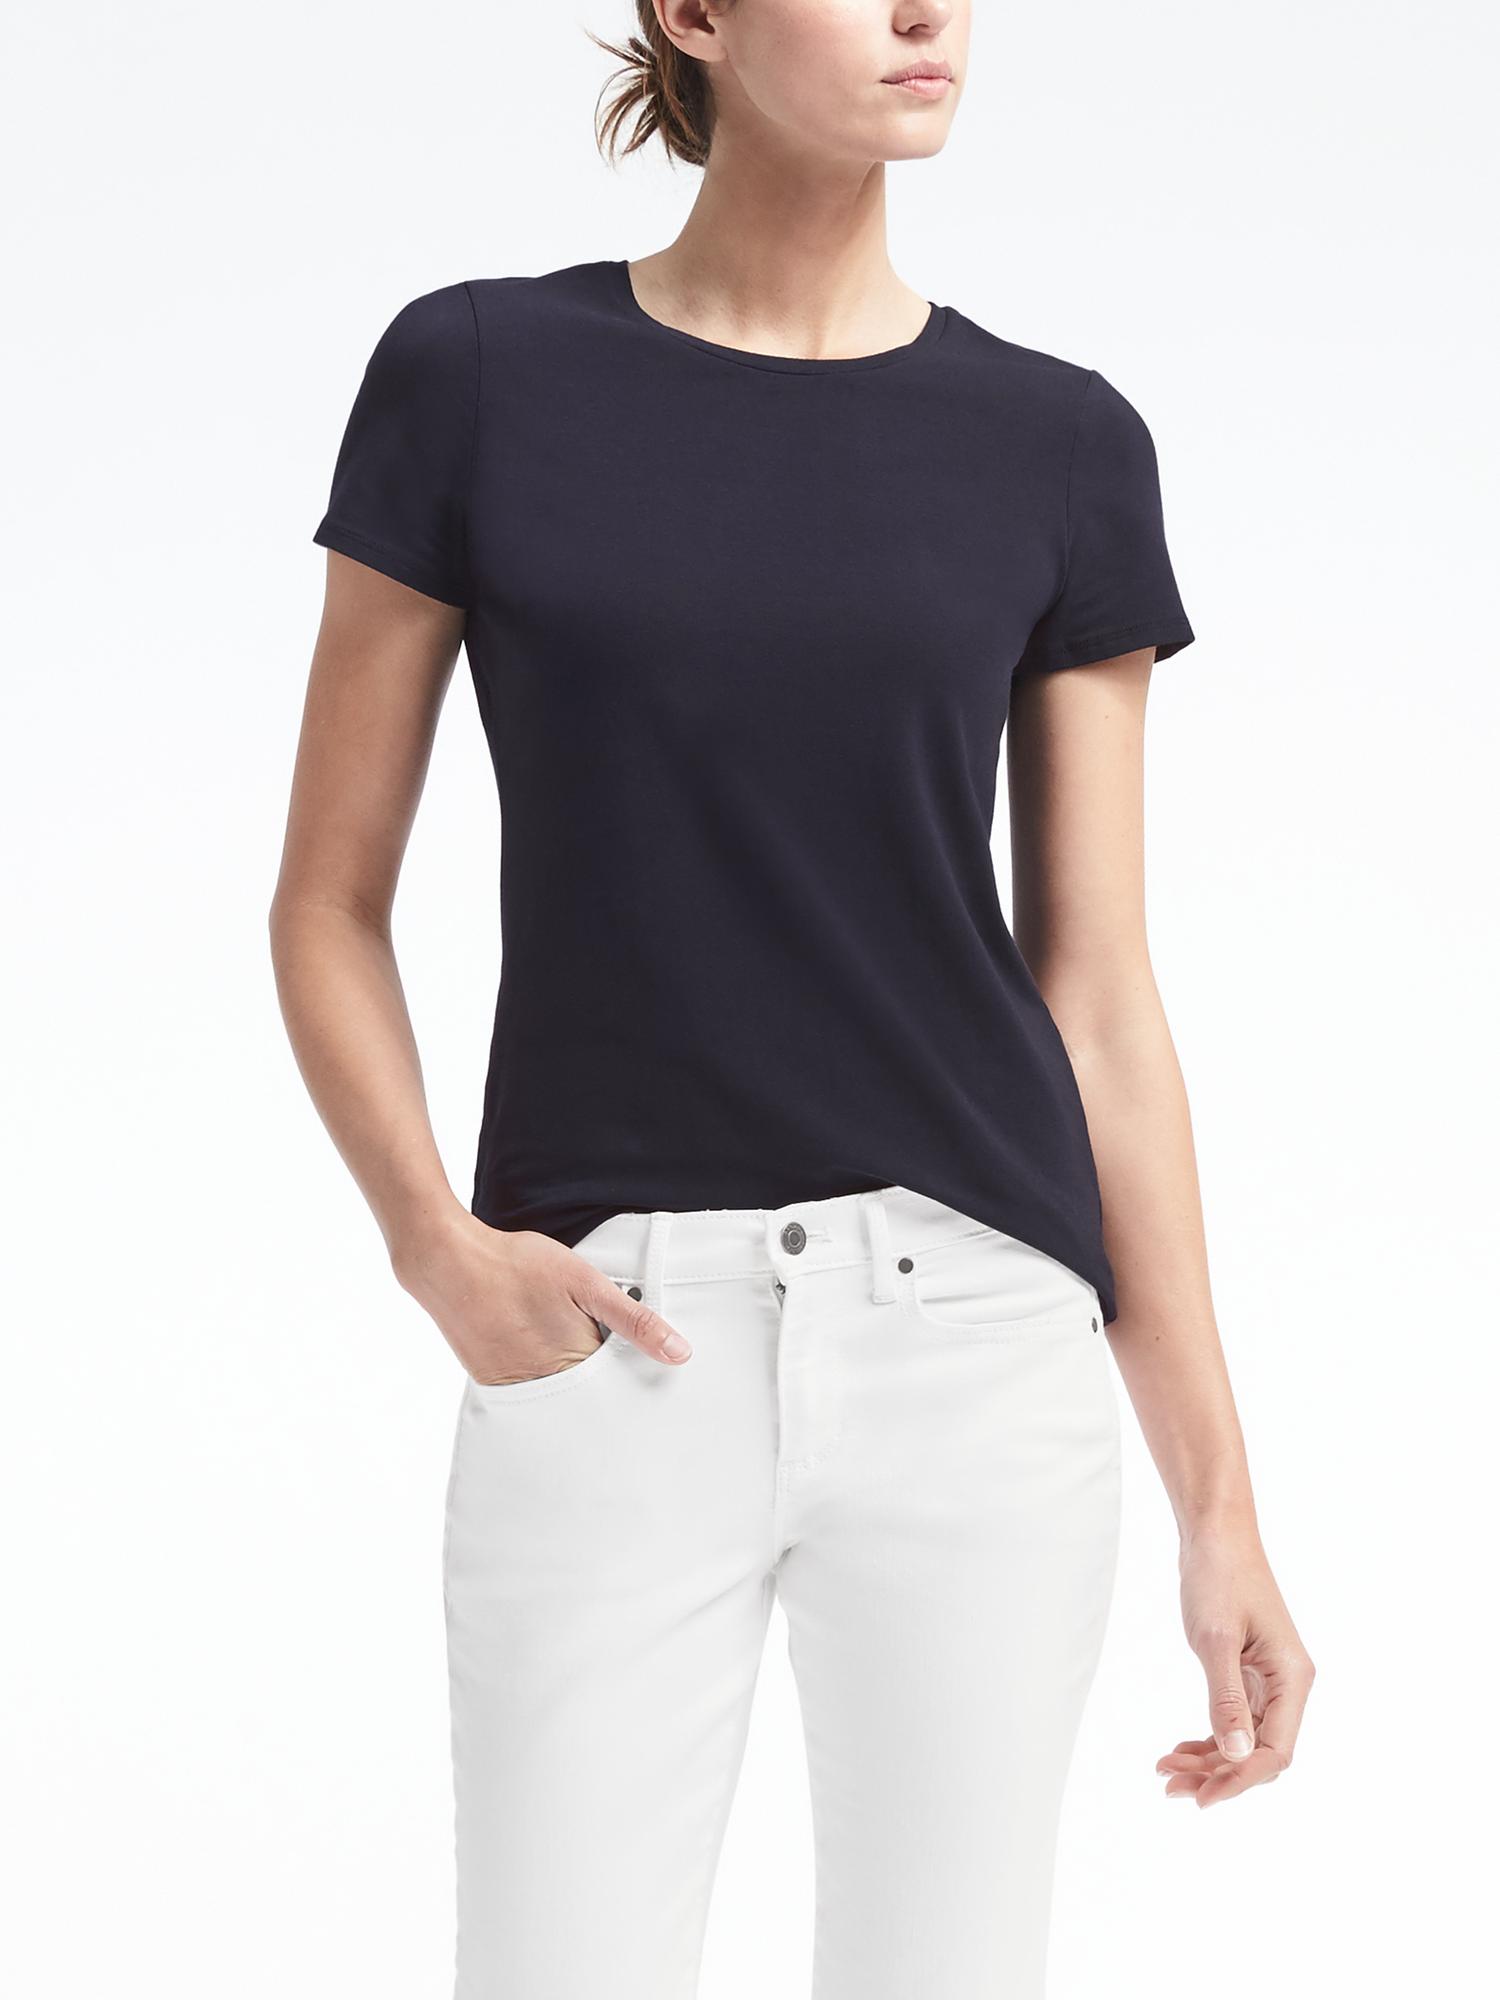 Short-Sleeve Stretch-to-Fit Crew Tee